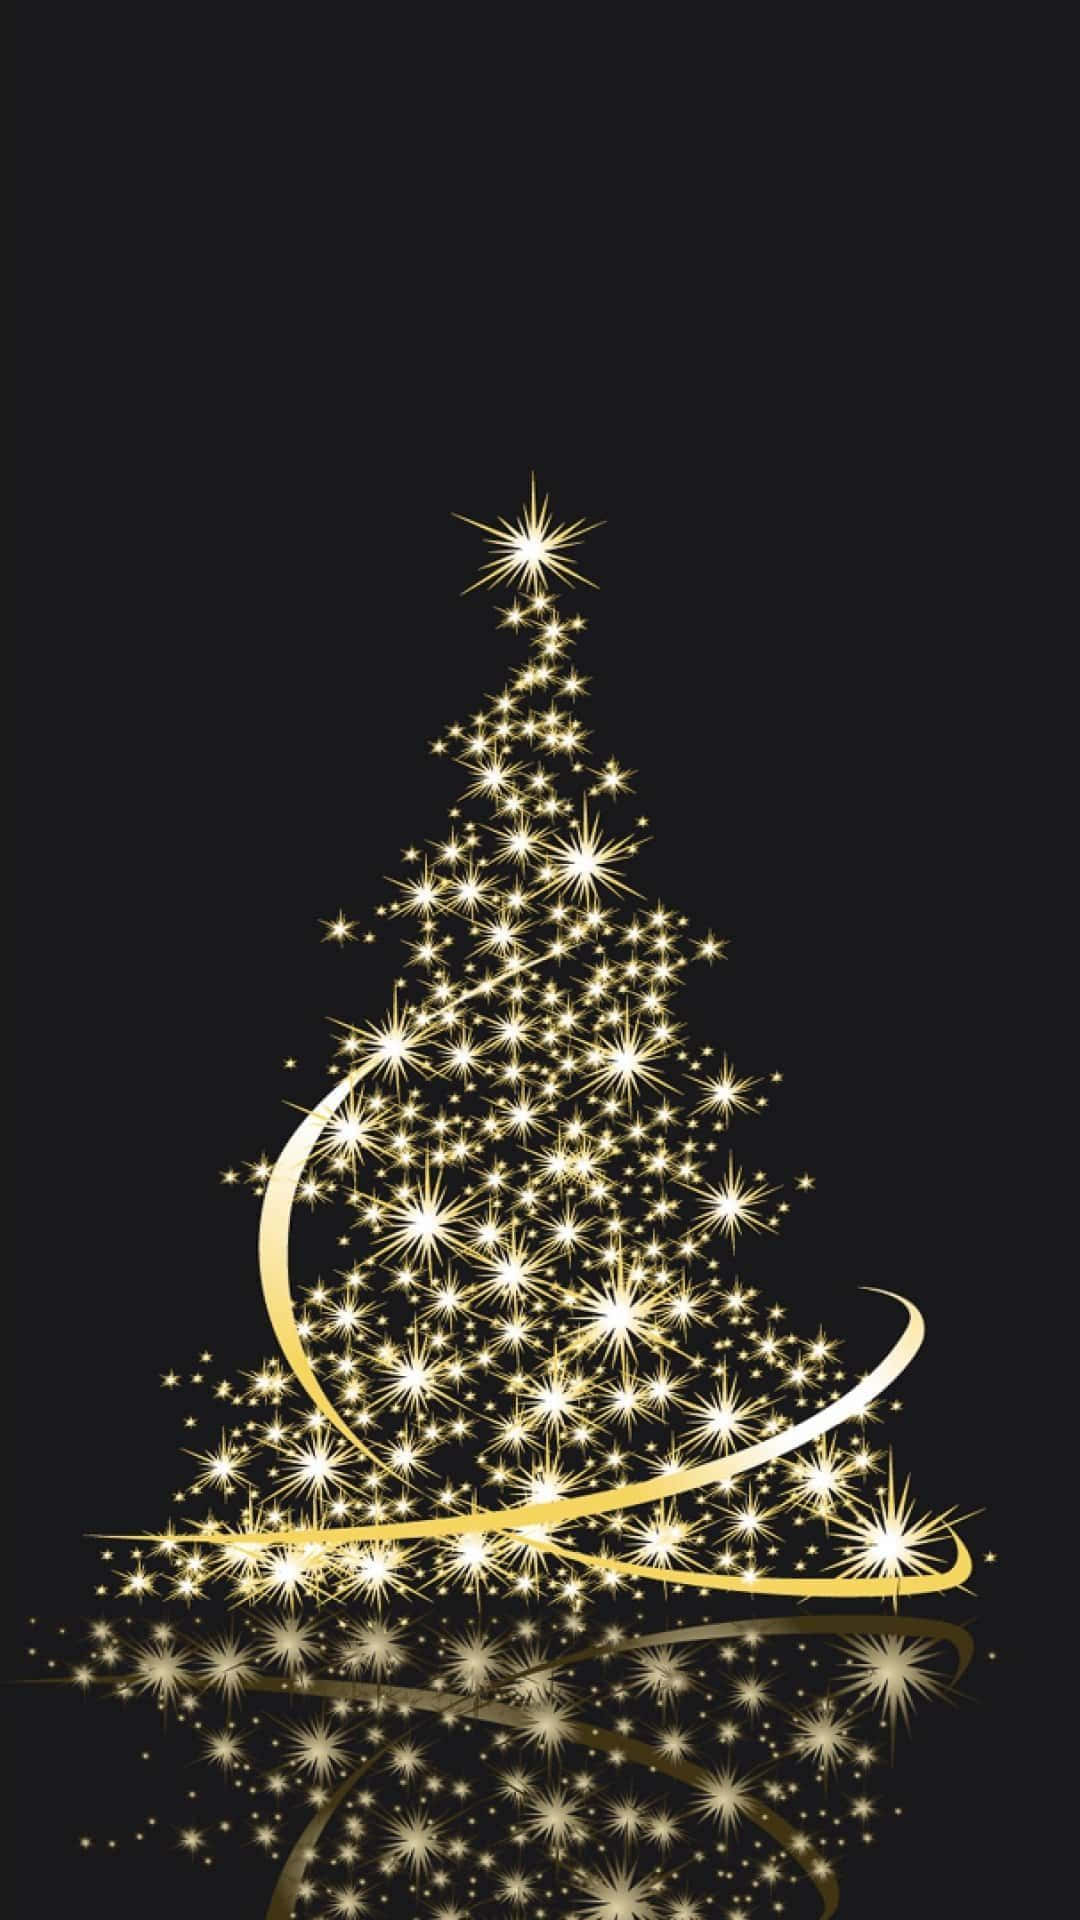 Christmas Tree With Golden Stars On Black Background